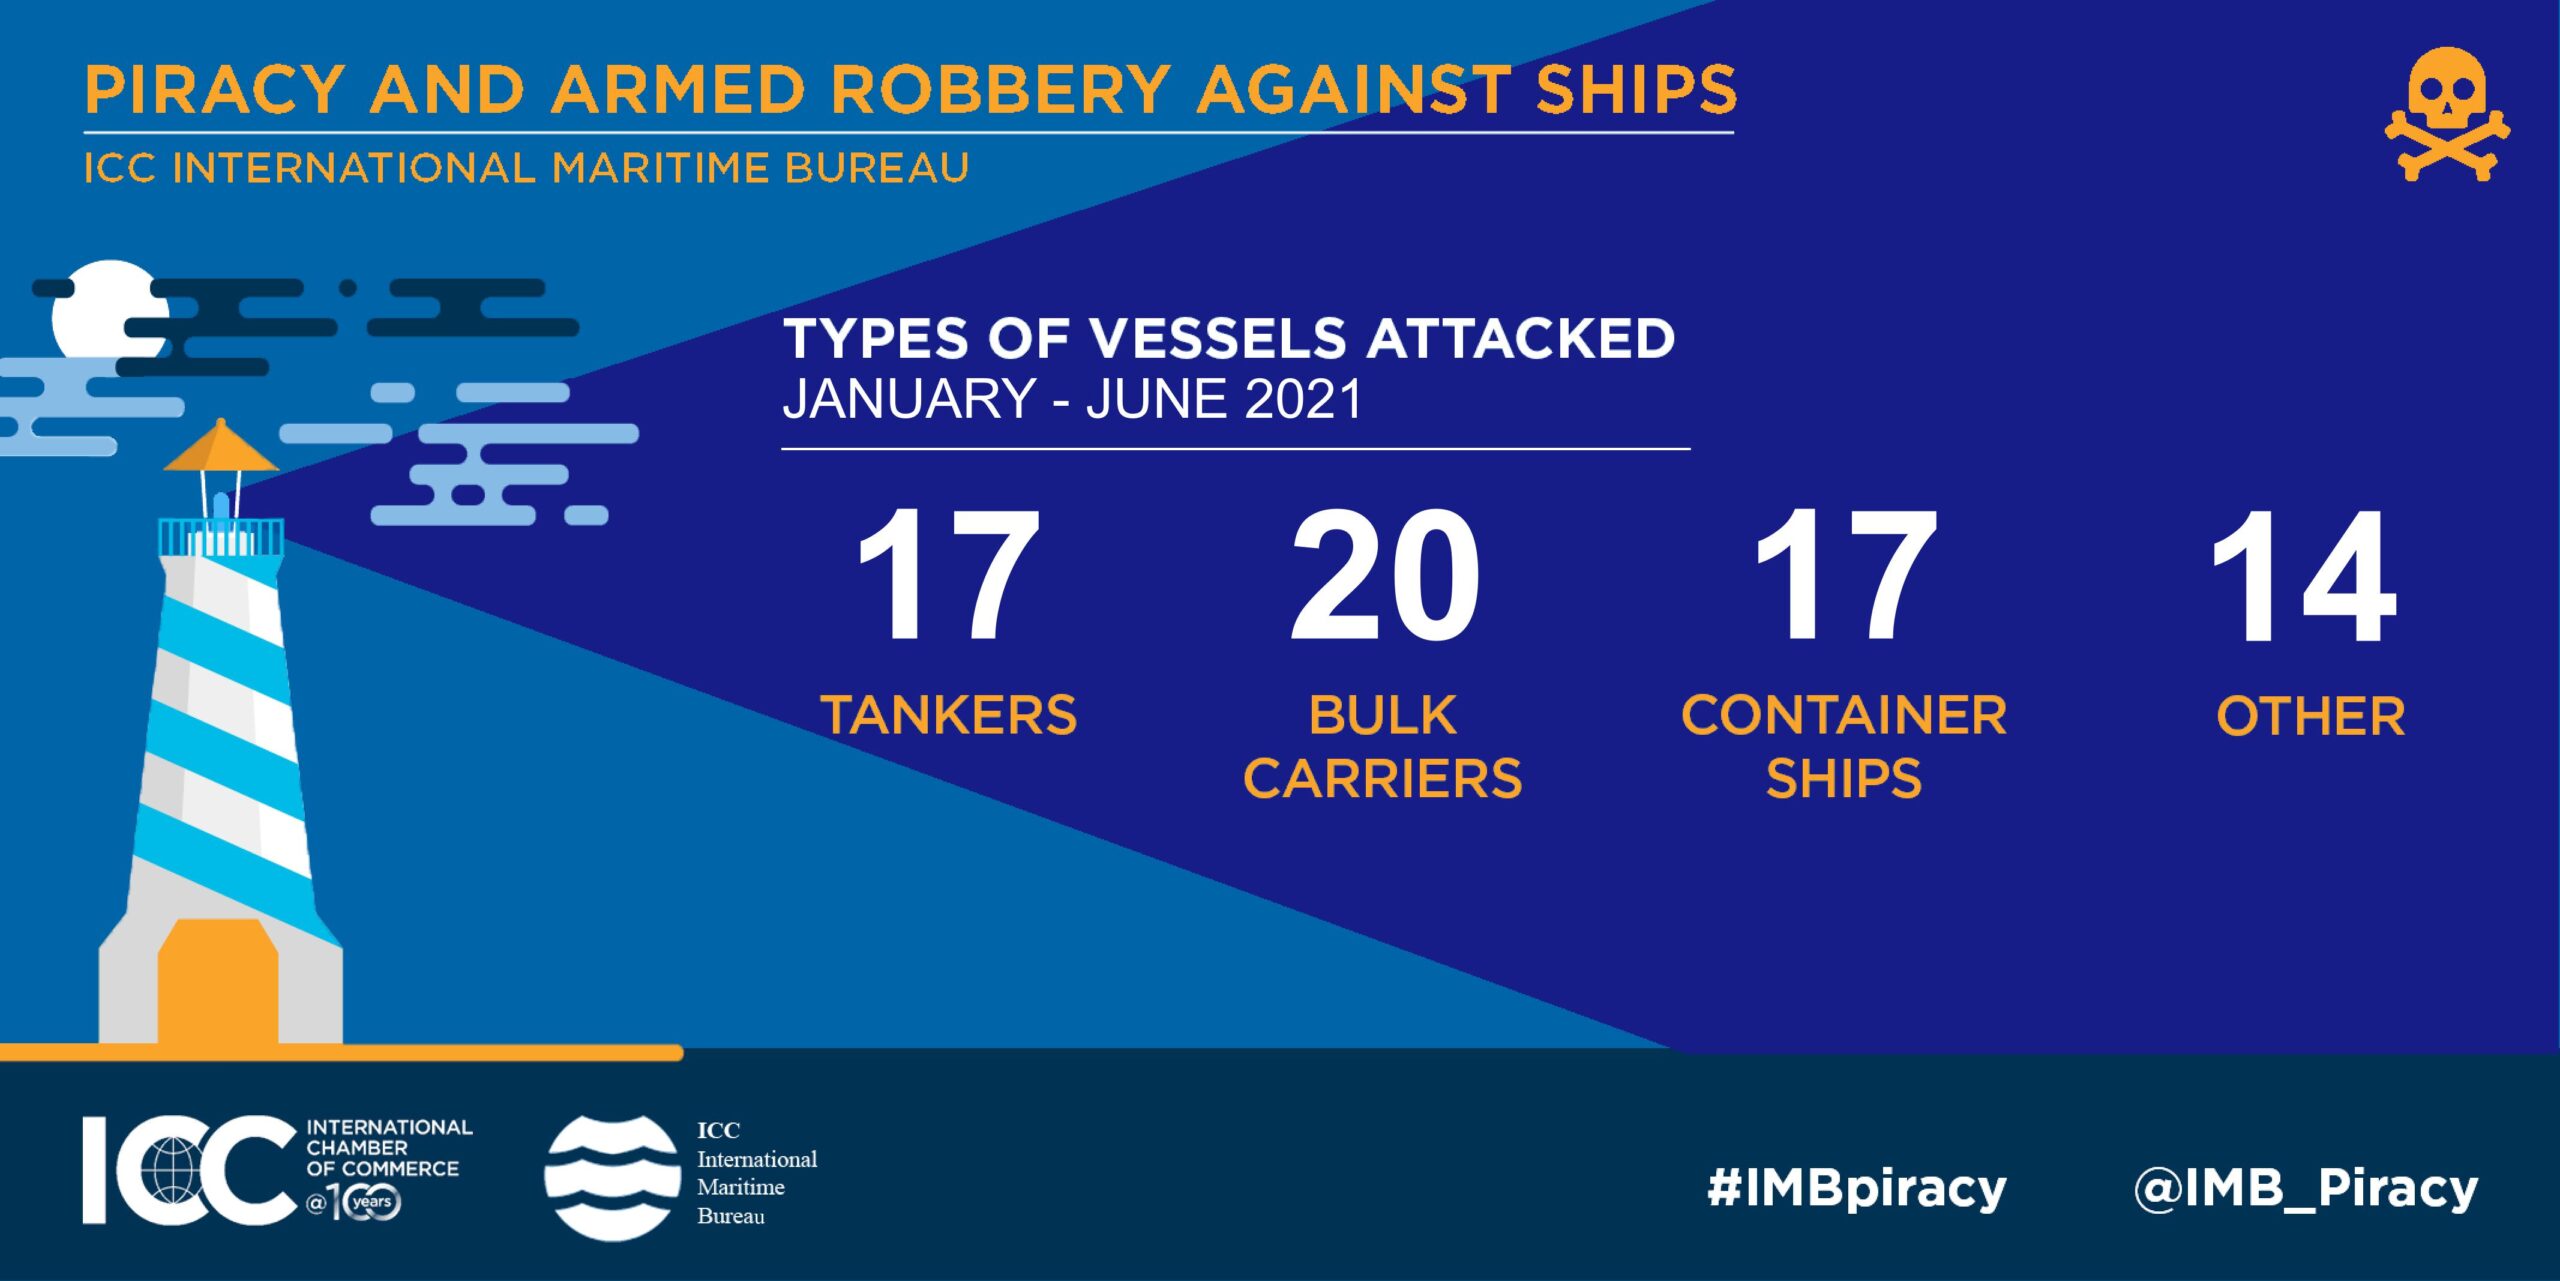 Piracy and armed robbery at lowest level in 27 years, says IMB